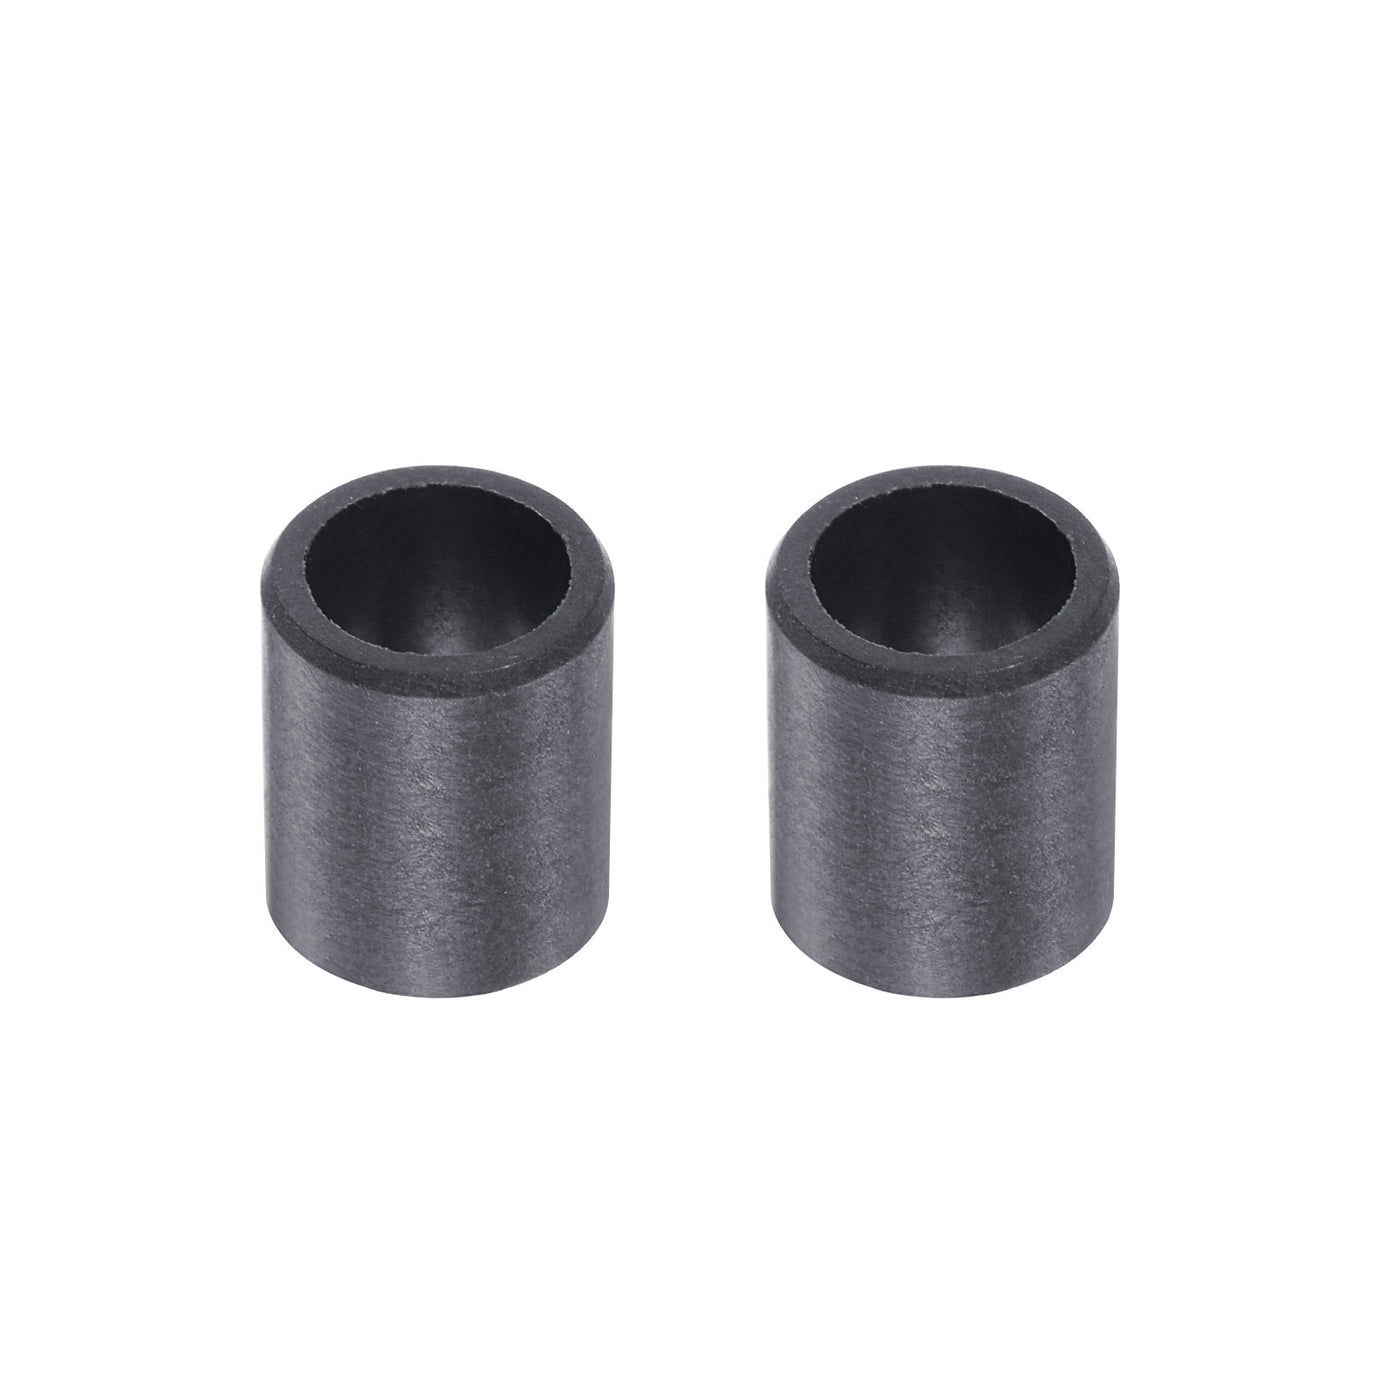 uxcell Uxcell Sleeve Bearings 6mmx8mmx10mm POM Wrapped Oilless Bushings Black 2pcs